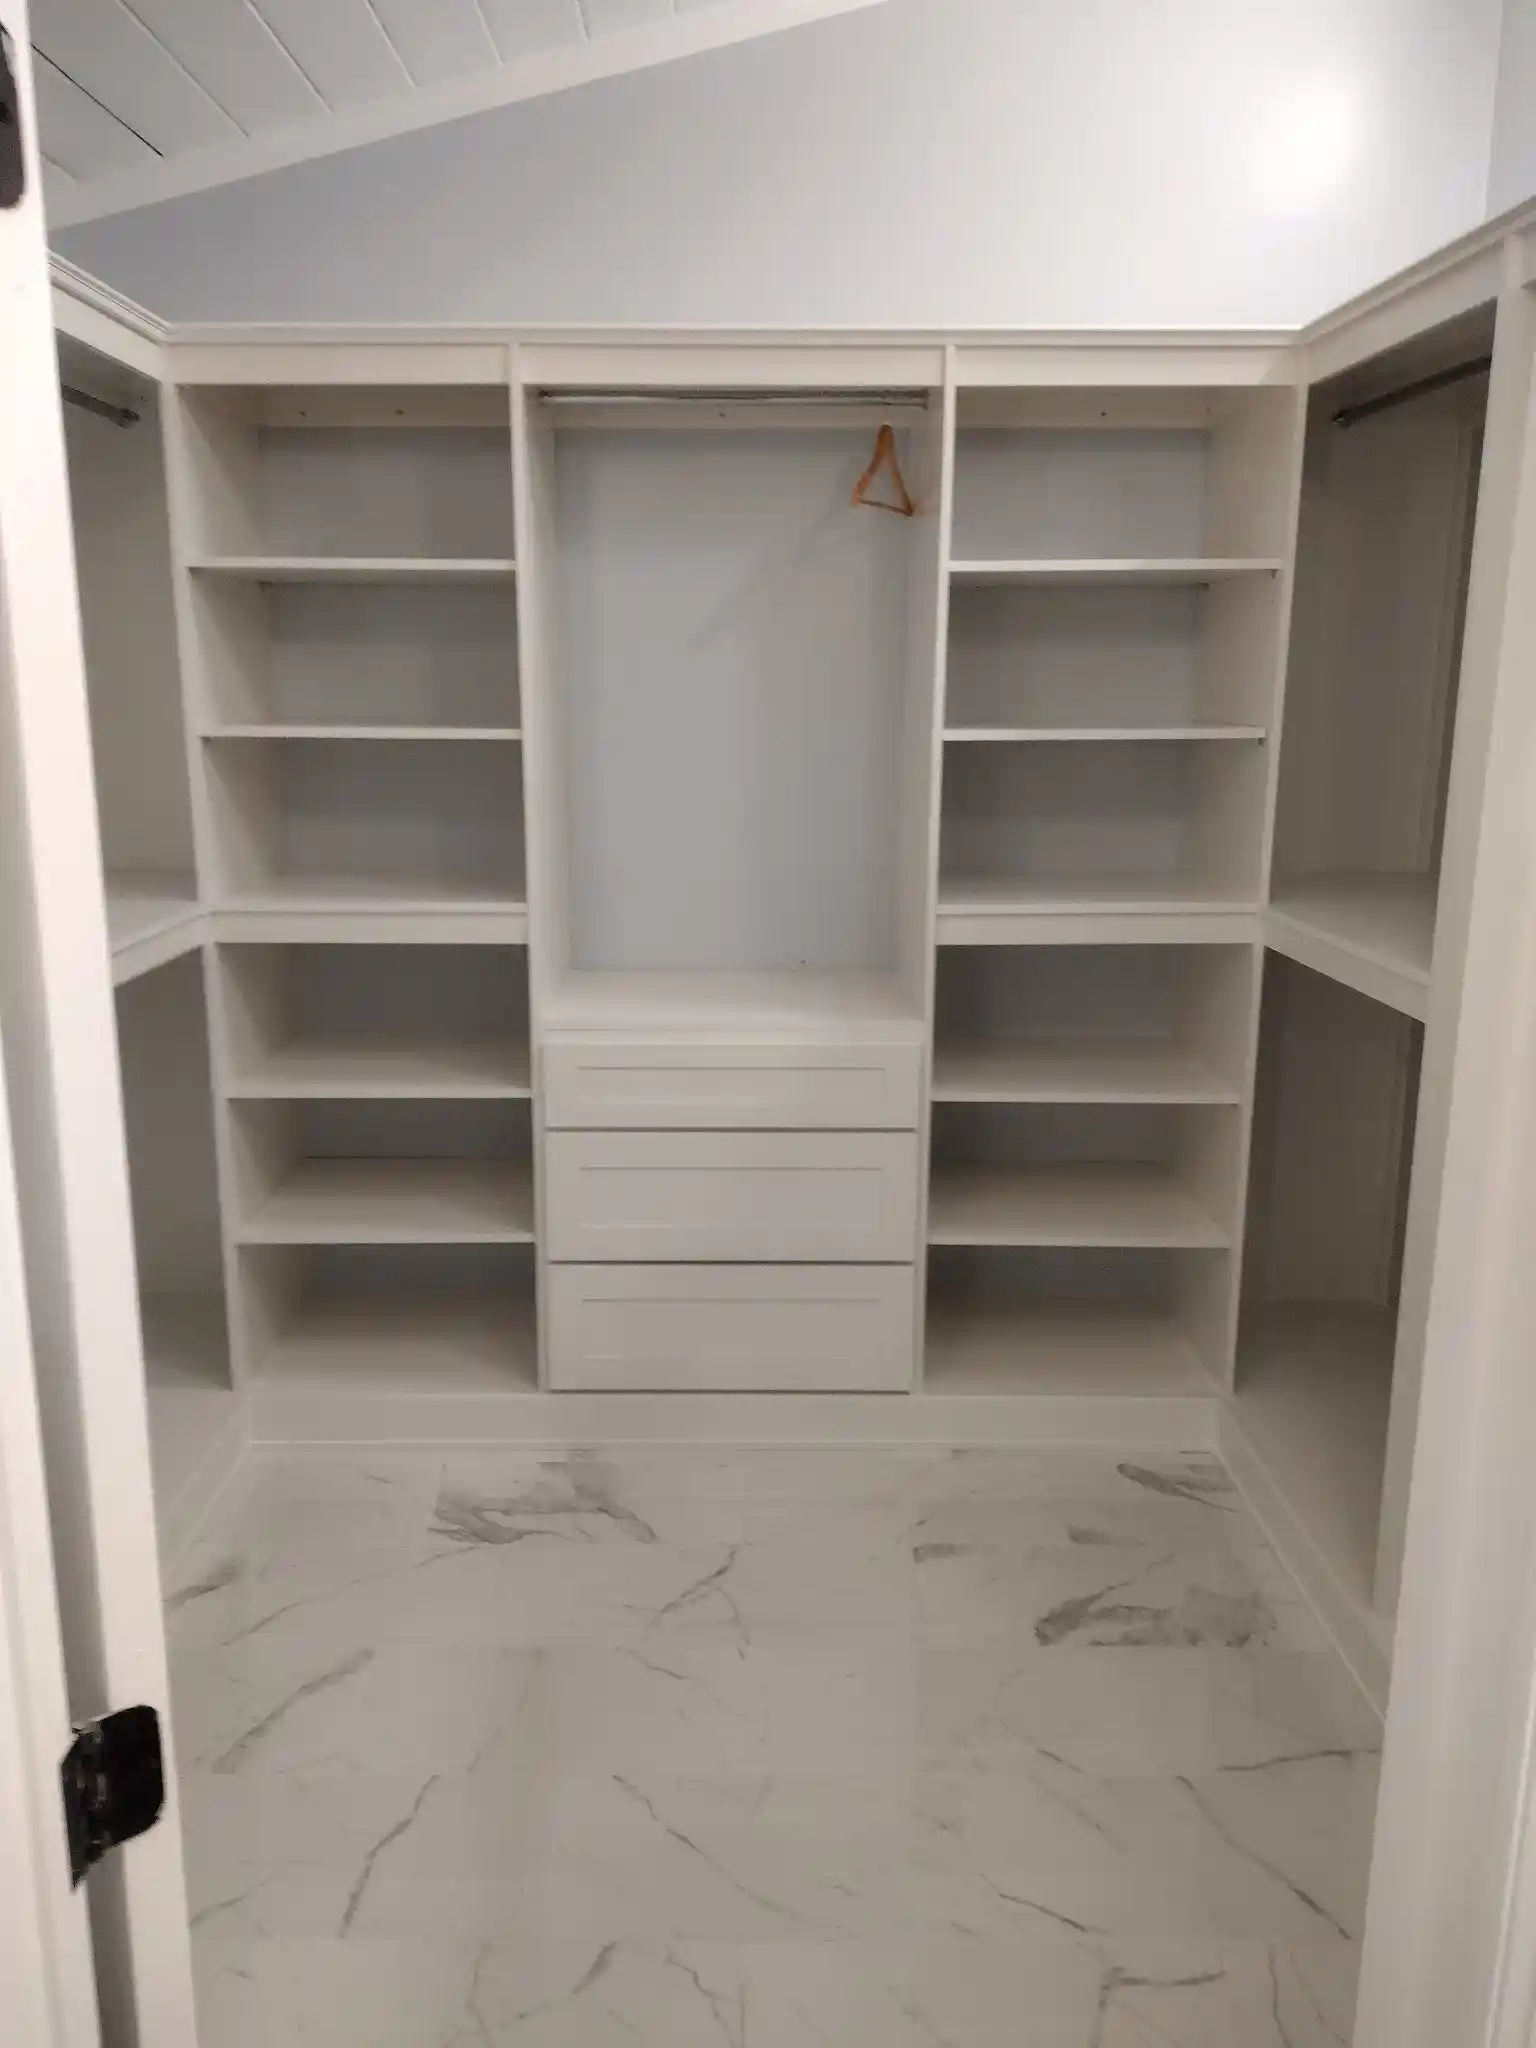 Custom closet connected to bathroom remodeling project in Knoxville.